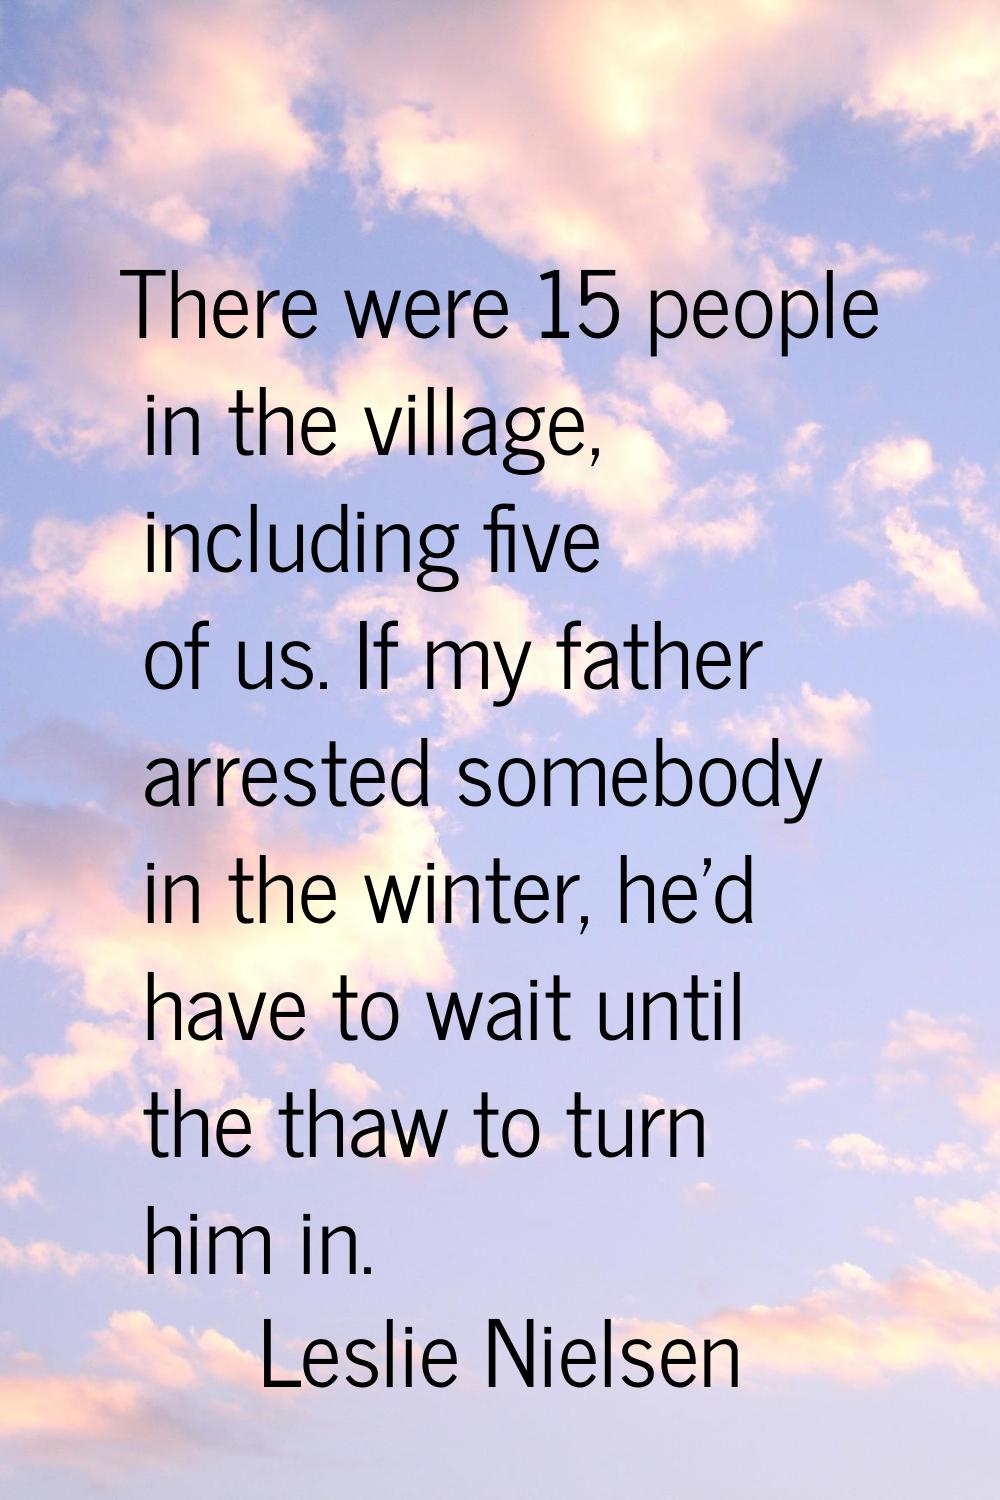 There were 15 people in the village, including five of us. If my father arrested somebody in the wi